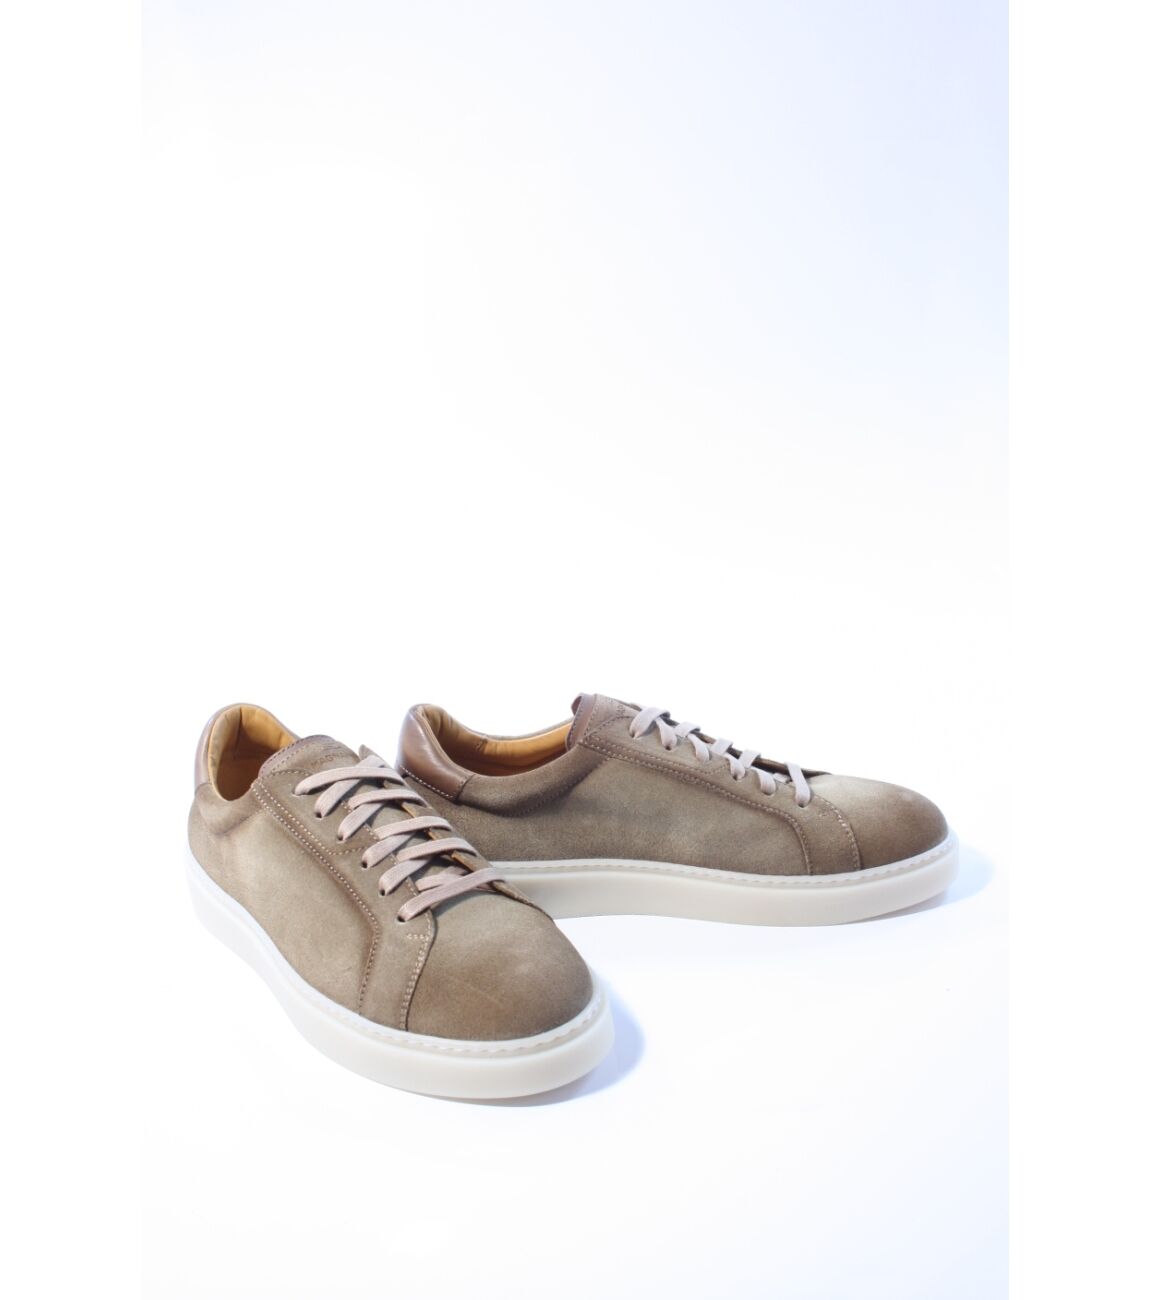 Magnanni Heren sneakers taupe 43.5